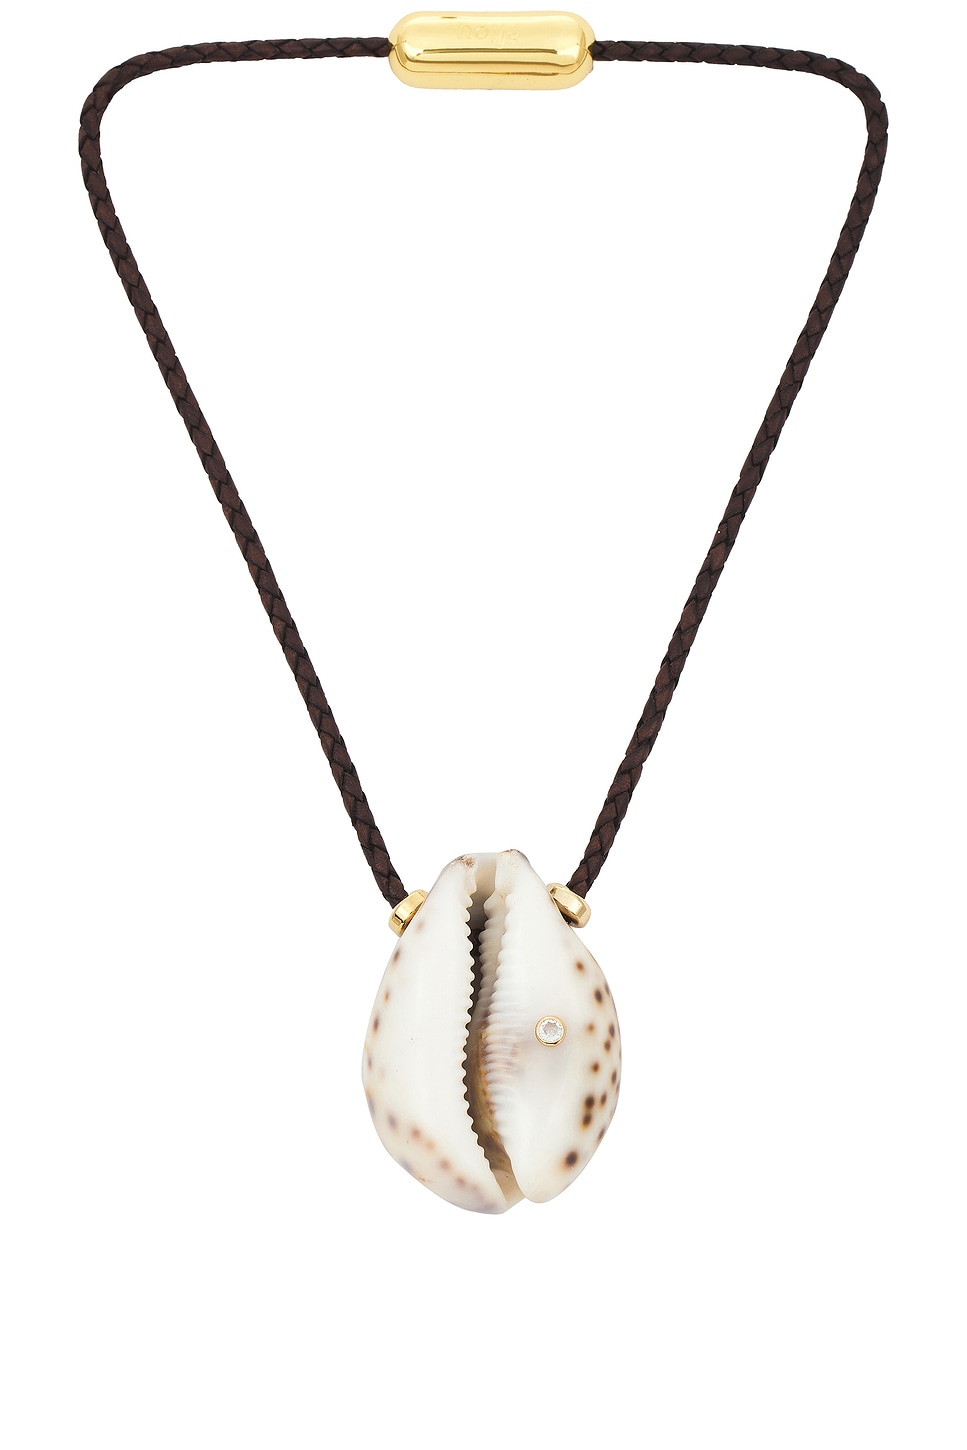 Image 1 of Eliou Recife Necklace in Brown